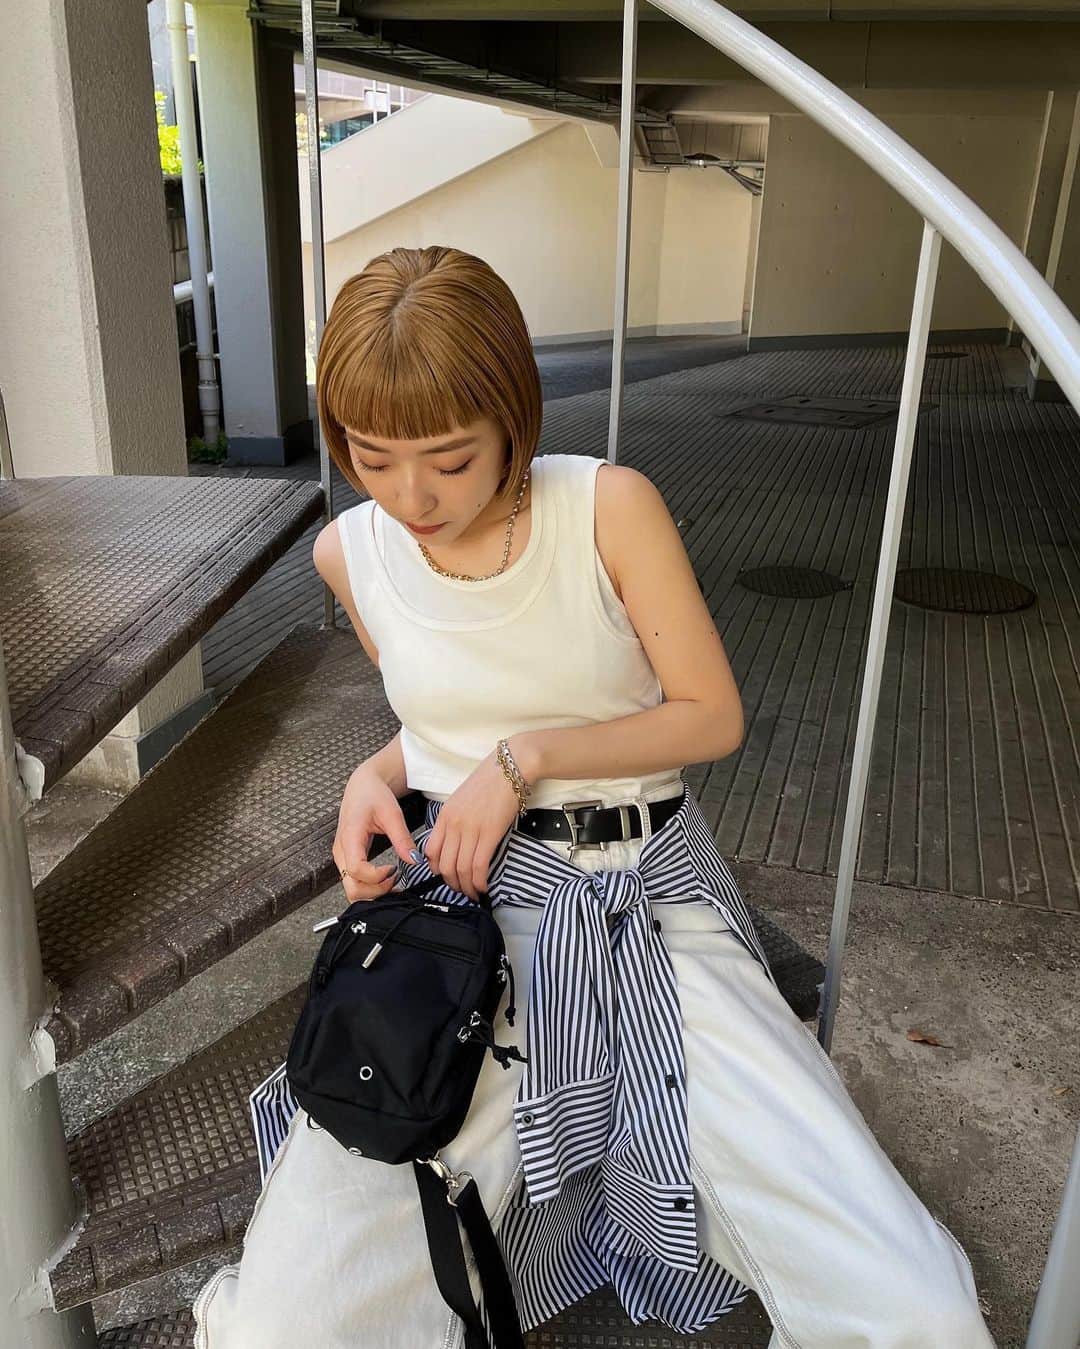 SLY OFFICIAL INFORMATIONさんのインスタグラム写真 - (SLY OFFICIAL INFORMATIONInstagram)「ㅤㅤㅤㅤㅤㅤㅤㅤㅤㅤㅤㅤㅤ #SLY_info @momoka_suda_【158cm】 __________________________________ ㅤㅤㅤㅤㅤㅤㅤㅤ 5/12(FRI)SLY店舗入荷予定ㅤㅤㅤㅤㅤㅤ ☑︎ASYMMETRY 2P TANK TOP (030GS080-2860) WHT,BLK,PUR ㅤㅤㅤㅤㅤㅤㅤㅤ 5/19(FRI)SLY店舗入荷予定ㅤㅤㅤㅤㅤ ☑︎INSIDE OUT STRAIGHT PT-E (030GSZ11-2930) WHT,BLK ㅤㅤㅤㅤㅤㅤ 5/19(FRI)SLY店舗入荷予定ㅤㅤㅤㅤㅤㅤㅤㅤ ☑︎LOOSE OVER ARMSLIT SH (030GSR30-5550) M/BLK,M/BLU ㅤㅤㅤㅤㅤㅤㅤ 5/13(SAT)SLY店舗入荷予定ㅤㅤㅤㅤㅤㅤ ☑︎MICHI x SLY POINTED TOE SANDAL (030GSA01-3600) BLU,BEG ㅤㅤㅤㅤㅤㅤㅤㅤㅤㅤㅤㅤㅤ ☑︎FIREMAN BELT (030GSY55-3050) BLK ㅤㅤㅤㅤㅤㅤㅤㅤㅤㅤㅤㅤㅤ ☑︎2WAY CROSSBODY BAG (030GSZ55-3660) BLK,IVOY ㅤㅤㅤㅤㅤㅤㅤㅤㅤㅤㅤㅤㅤ __________________________________ ※配送の都合により発売日が異なる場合がございます。 ※店舗により在庫状況が異なります。 #MICHIXSLY #SLY #SLY_fav」5月9日 15時07分 - sly_official_info